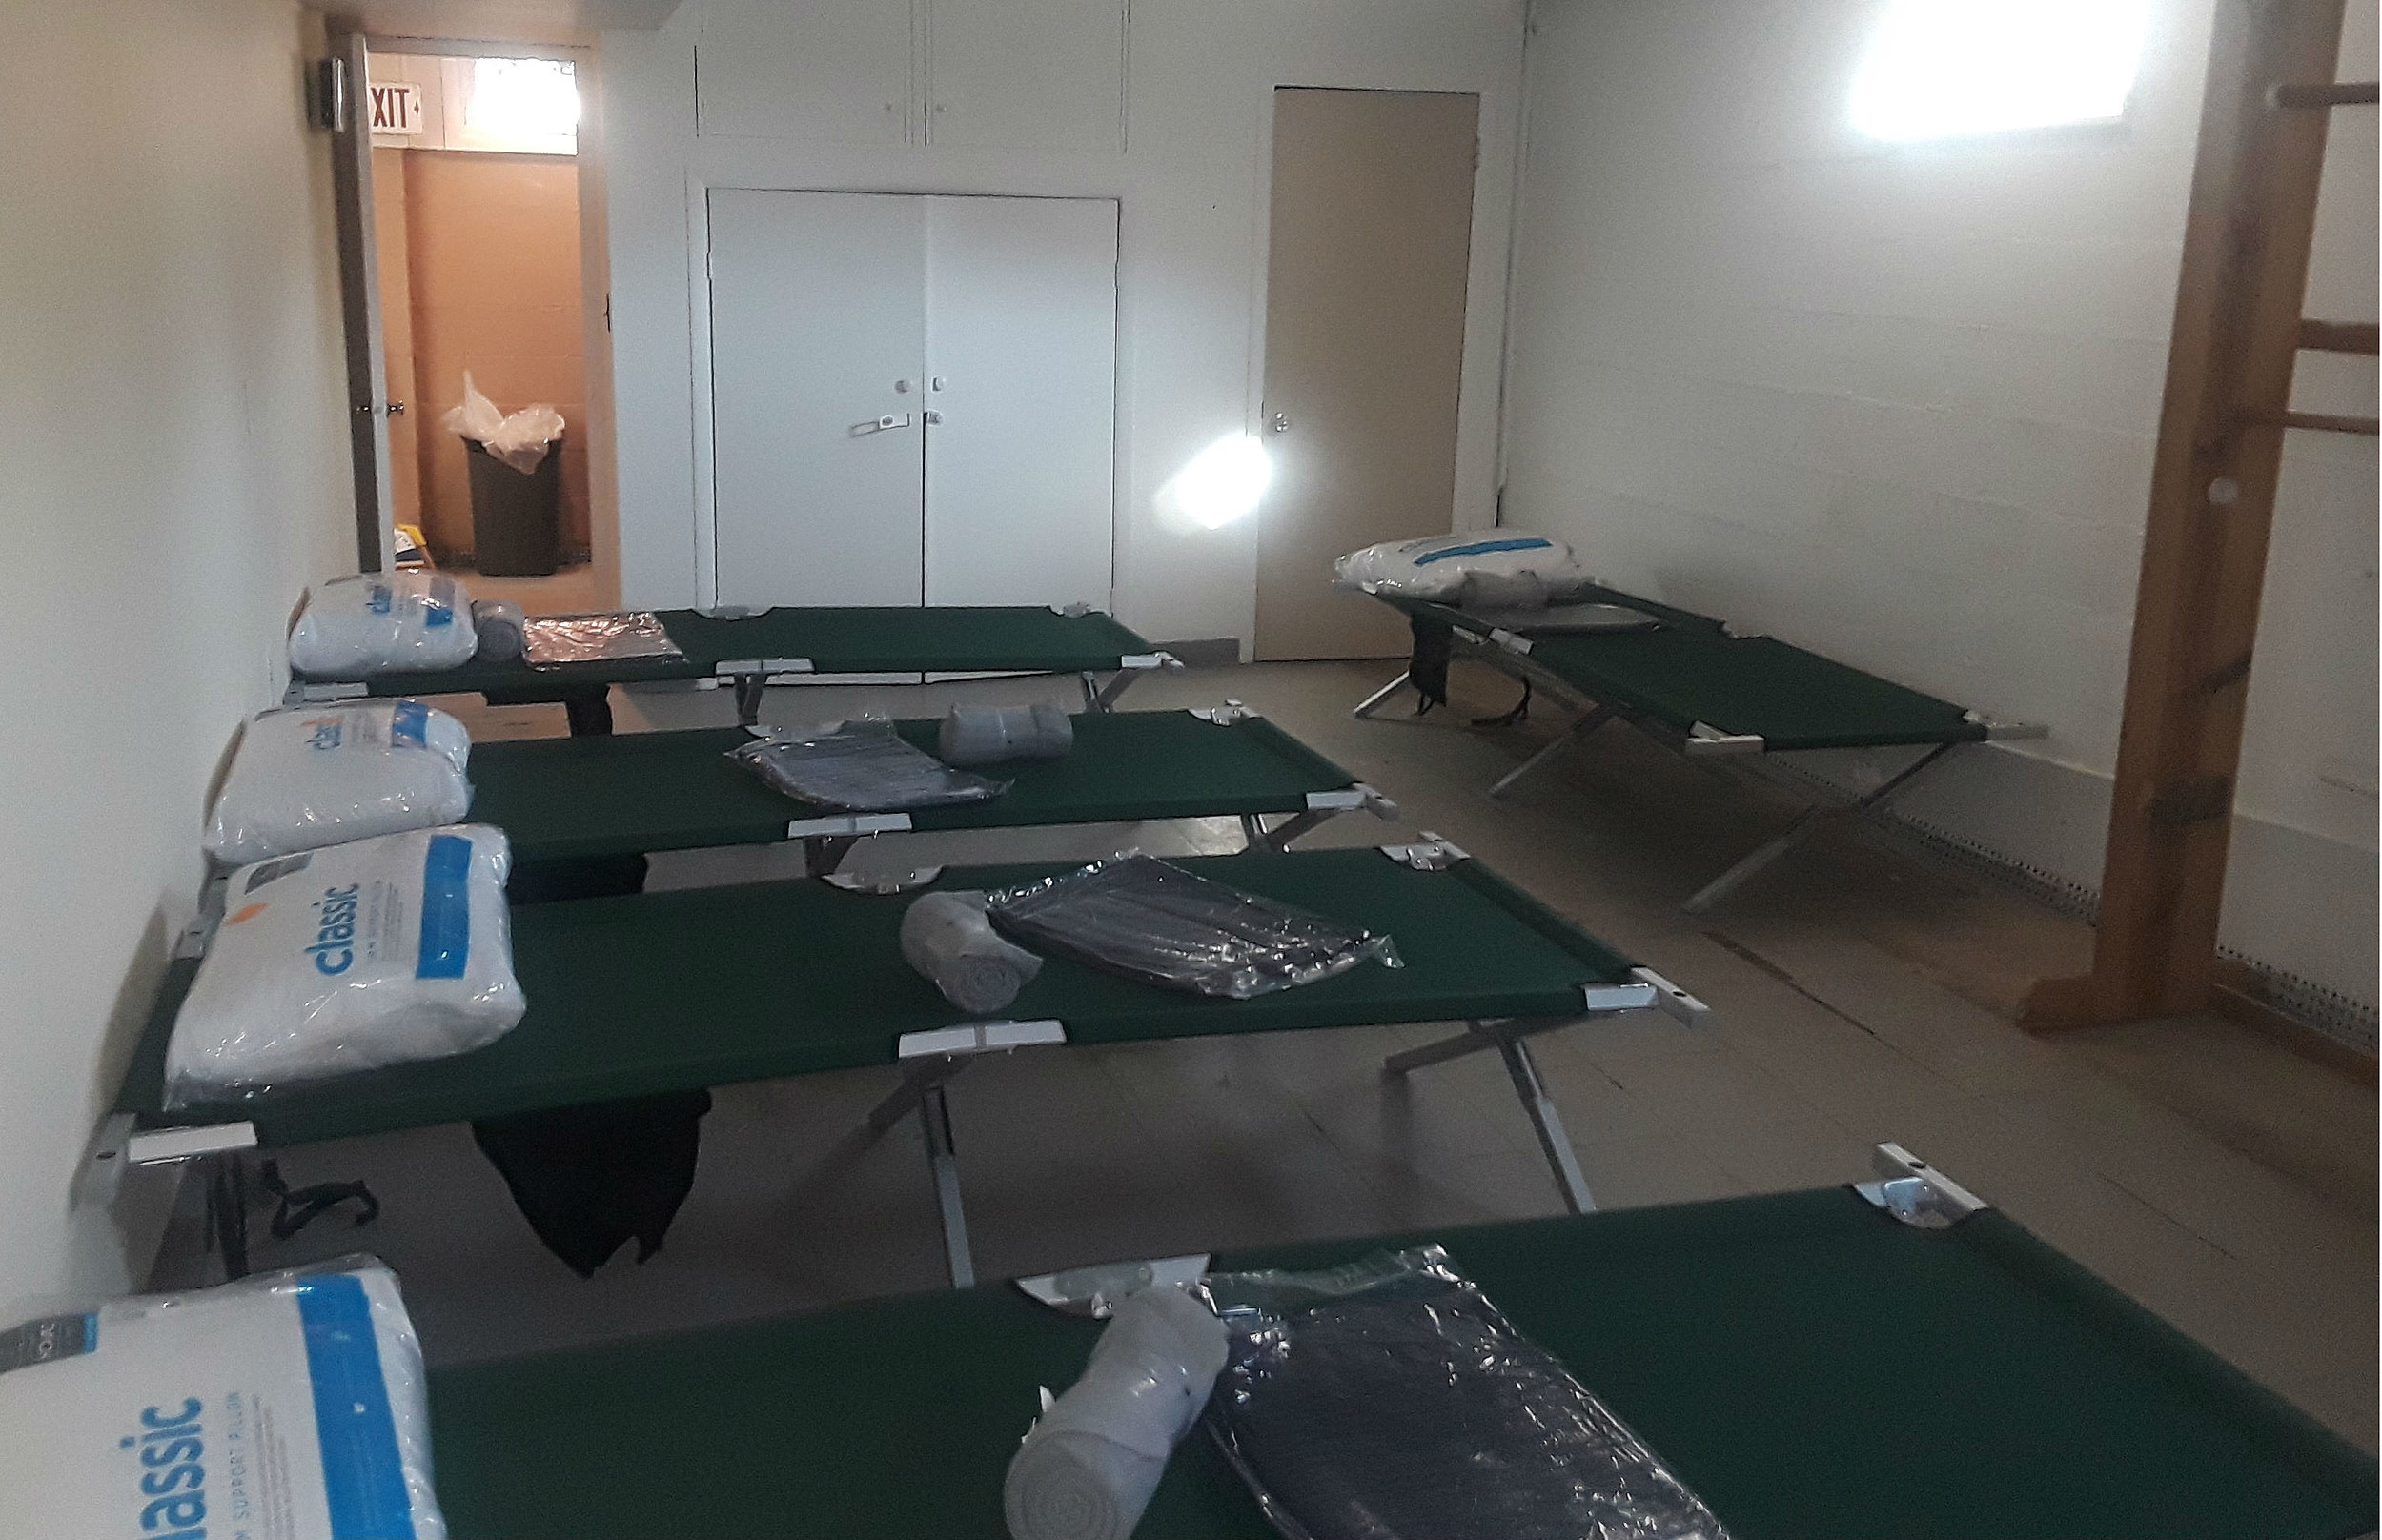 A warming center for the homeless in Toms River. (Credit: WOBM-FM)